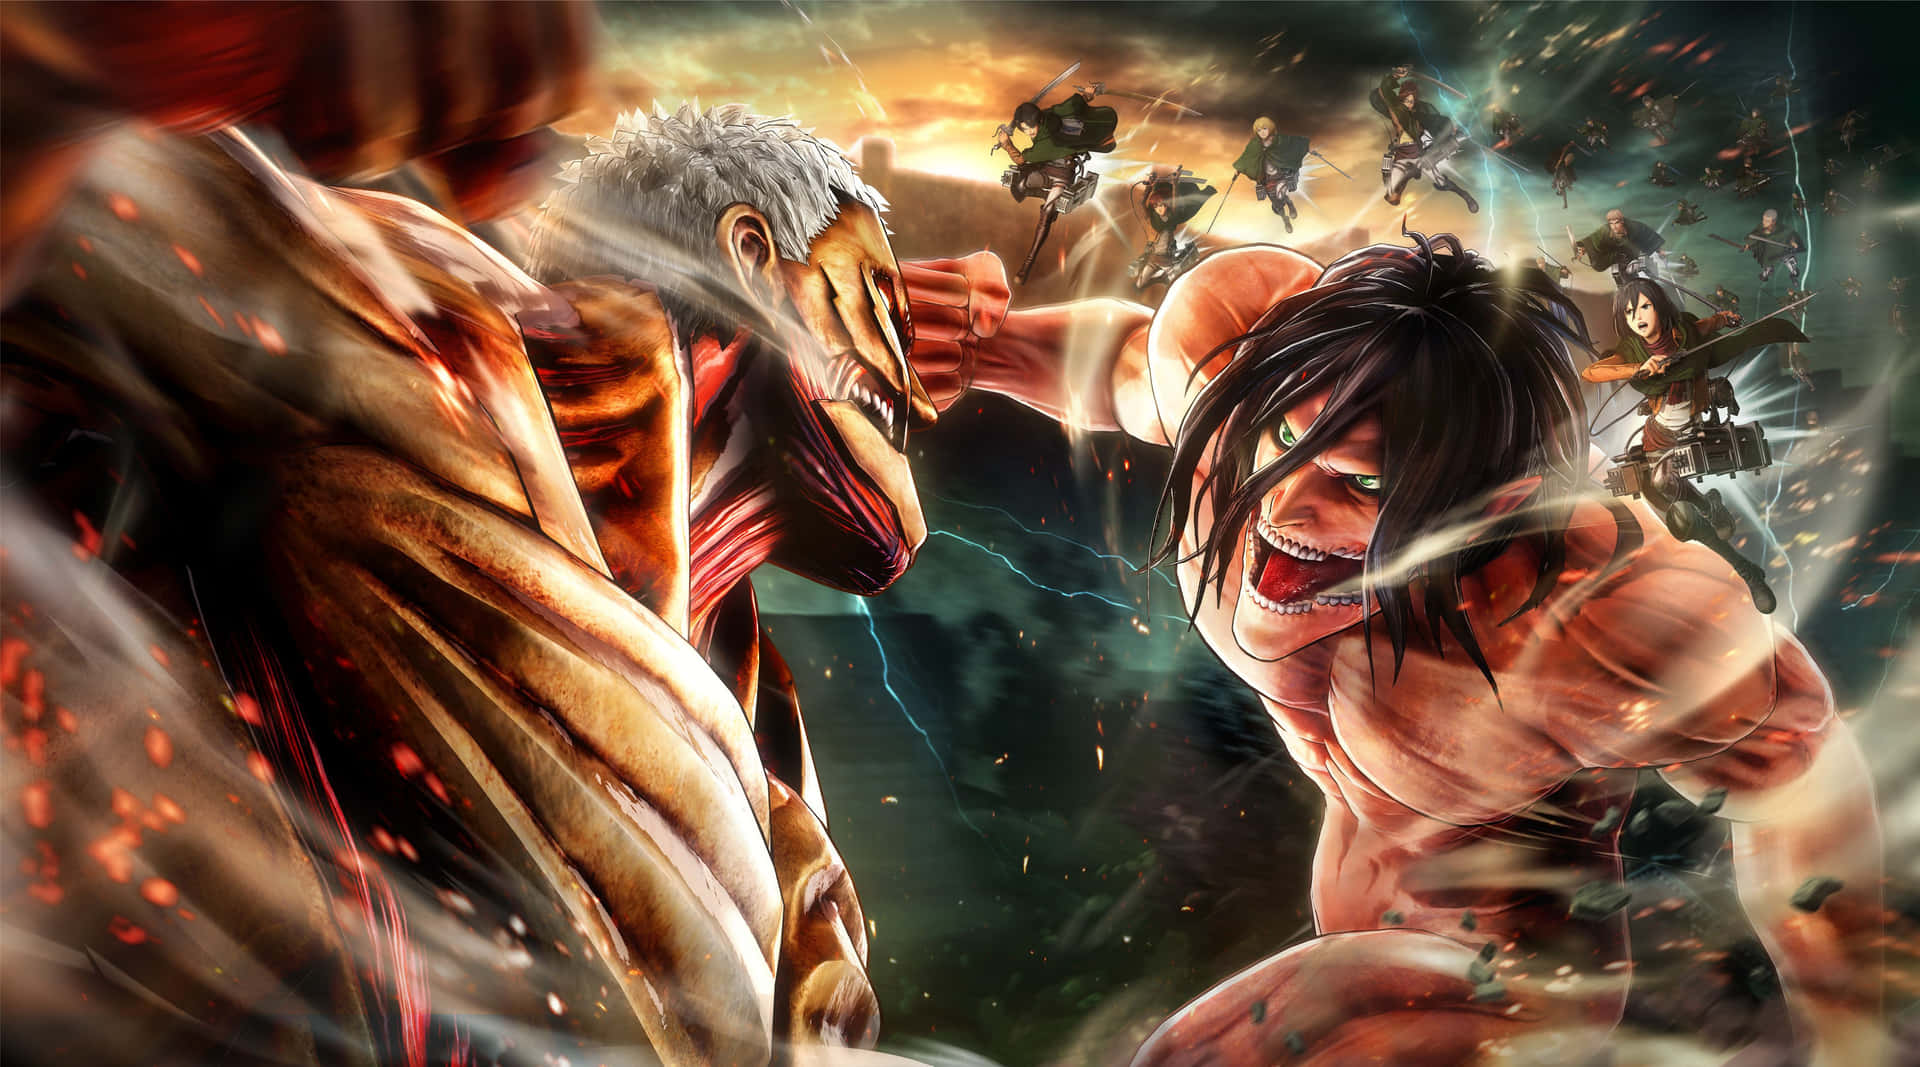 Epic battles between titans take place in the Great Titan War Wallpaper